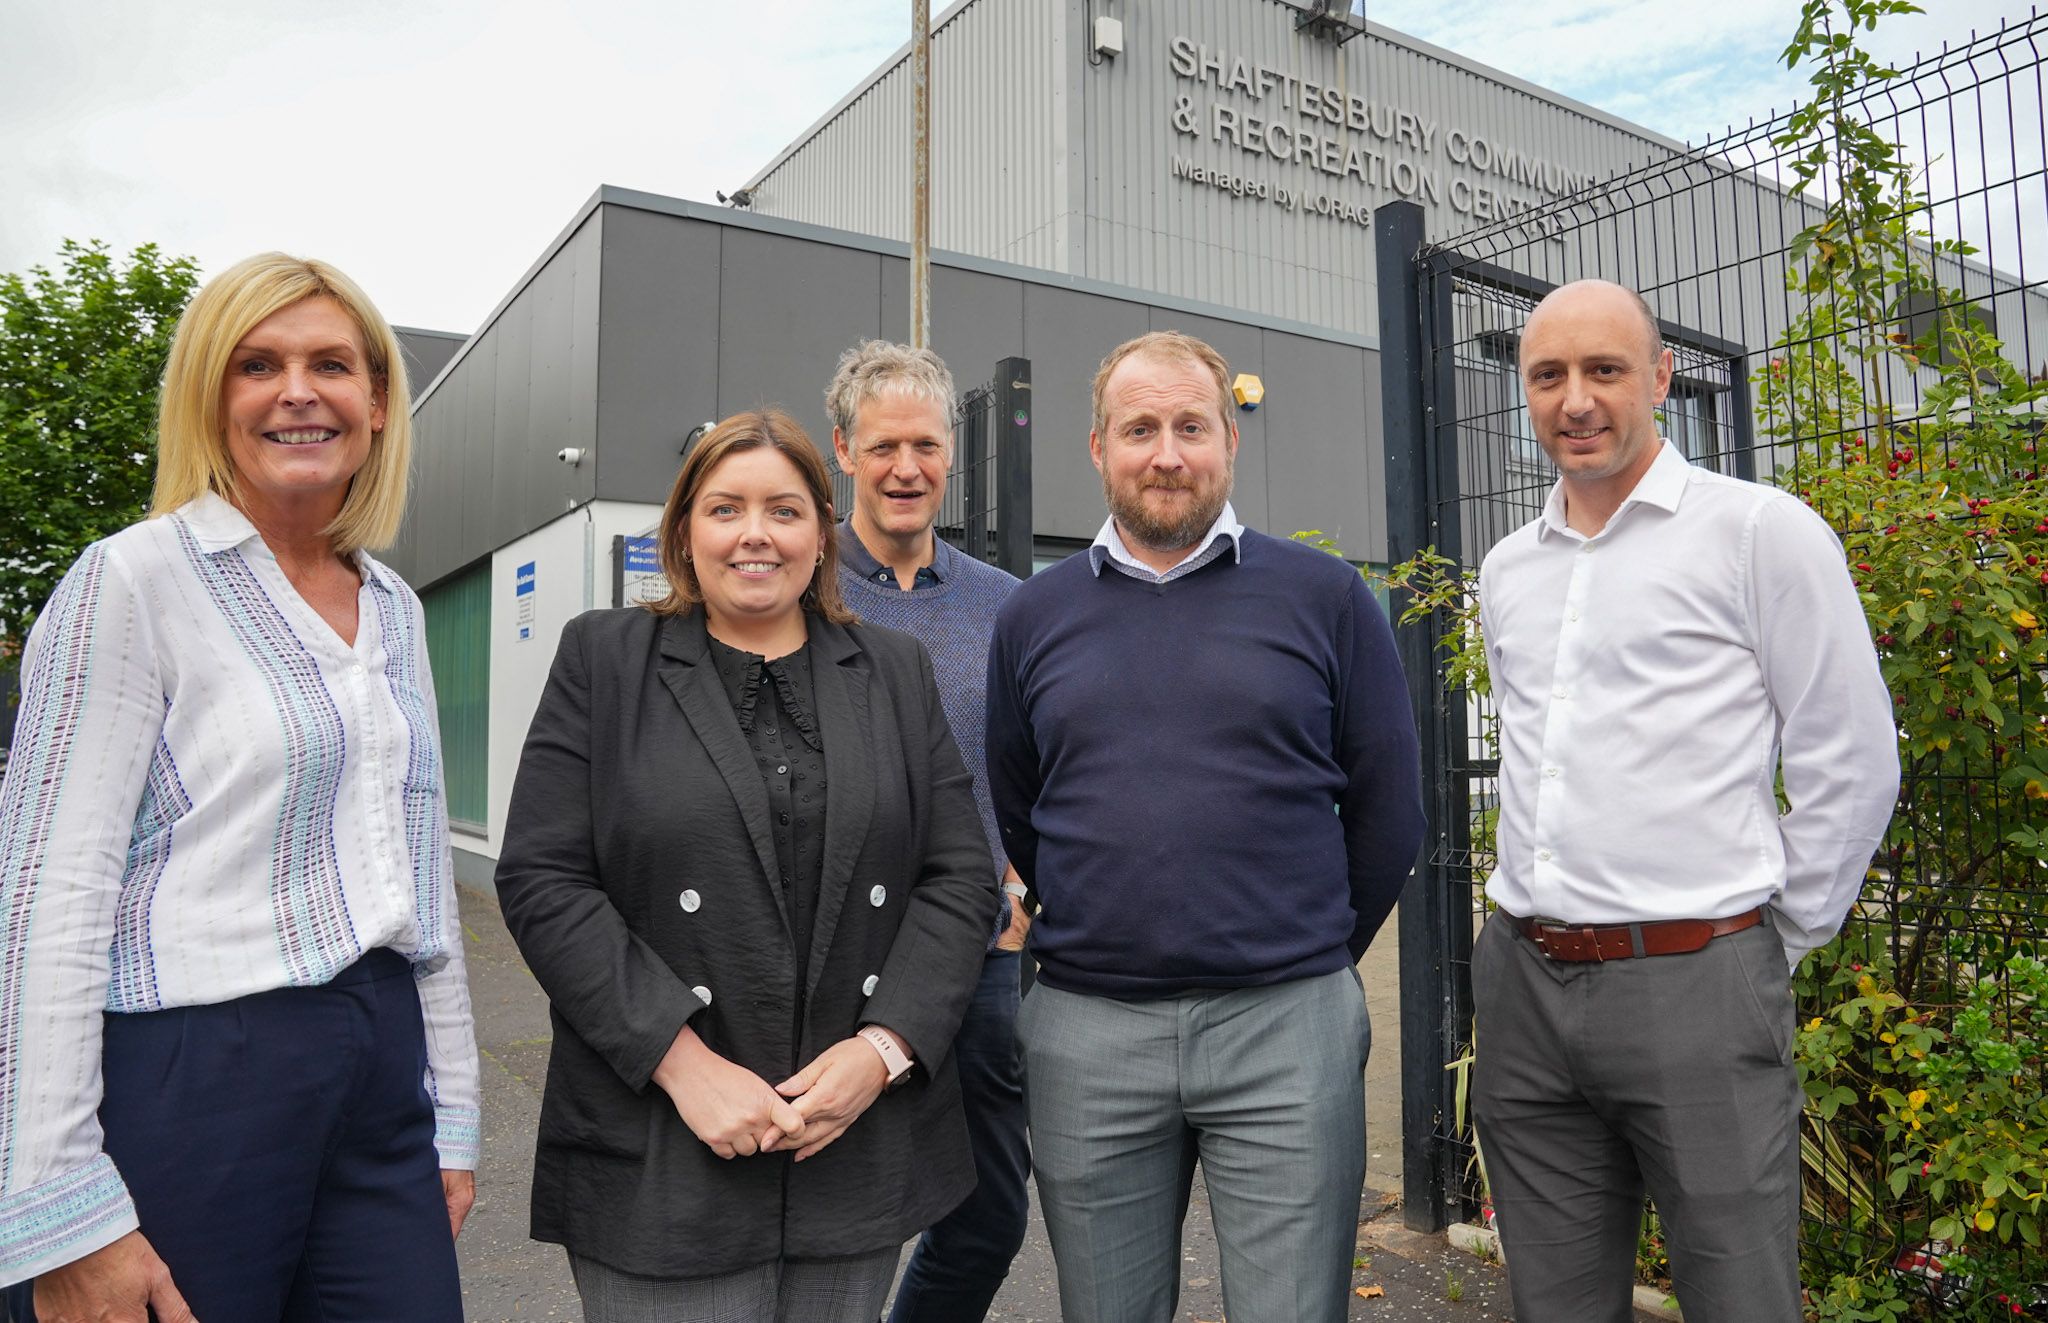 MEETING: Communities Minister Deirdre Hargey met with representatives from the universities, Belfast City Council and the PSNI 